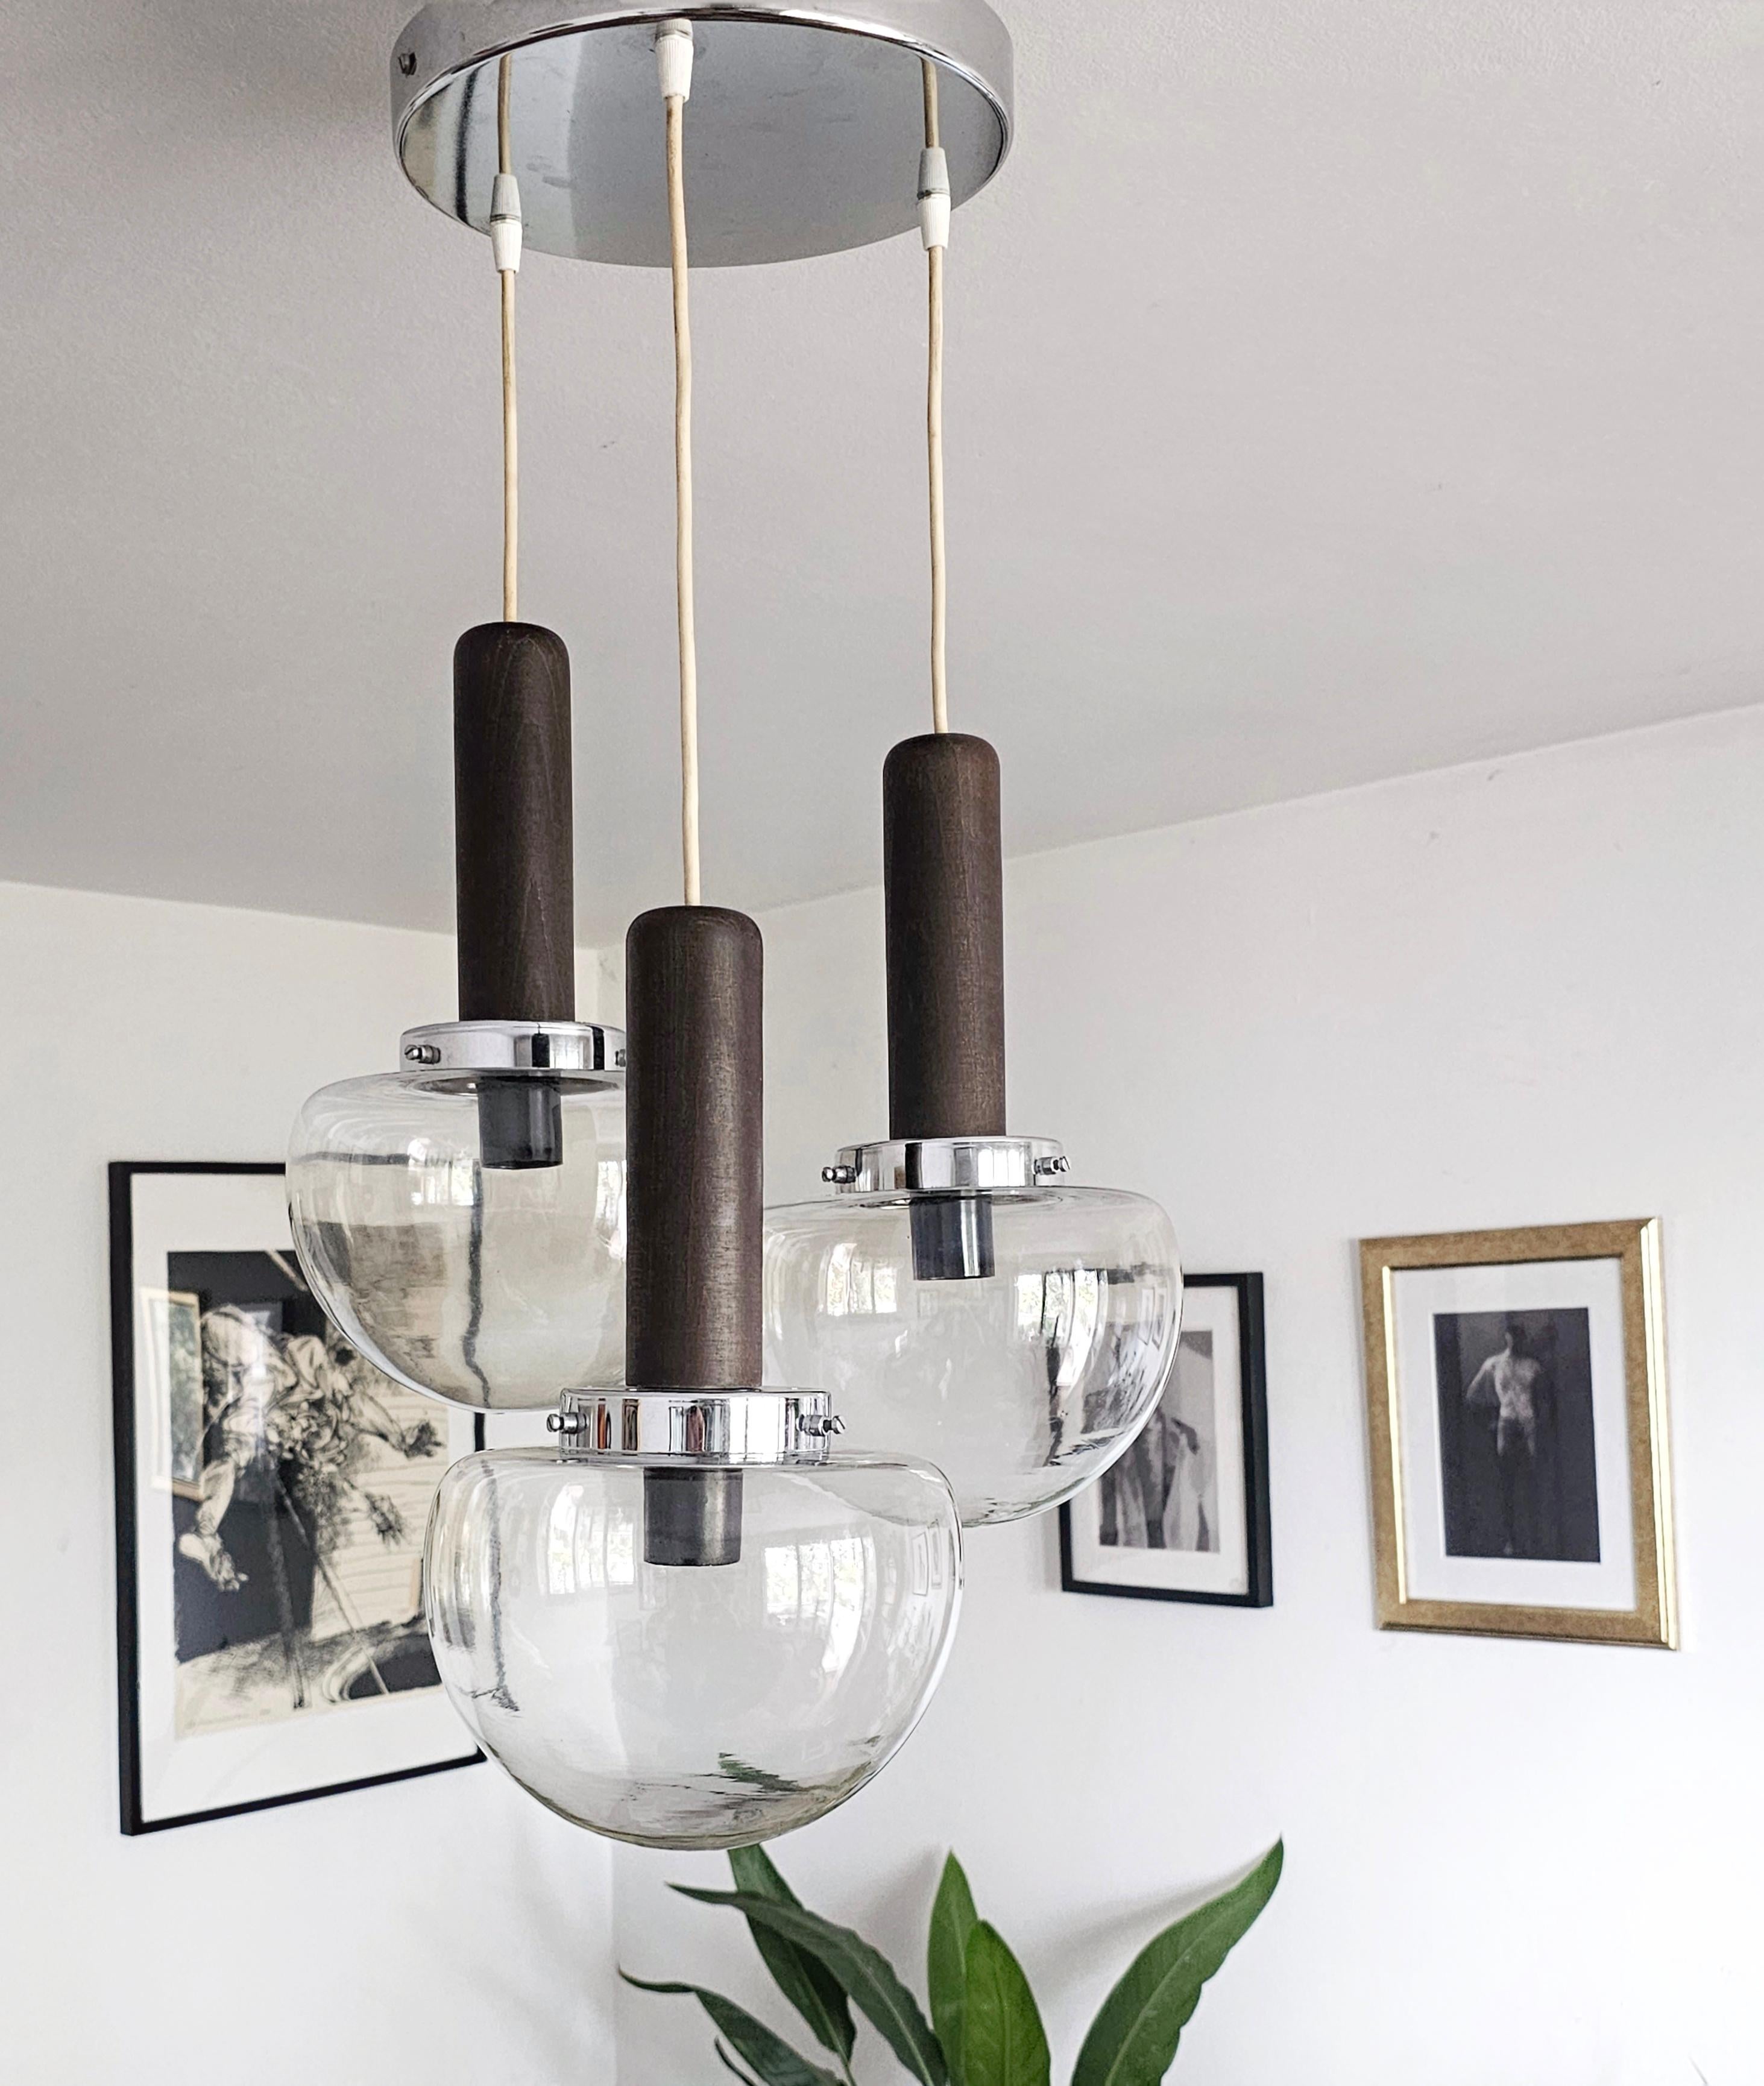 In this listing you sill find a gorgeous minimalist cascade chandelier manufactured by Sijaj Hrastnik. It features three levels, consisting of wooden cylinders and lightly smoked glass shades shaped as mushroom hats, with the circular chrome